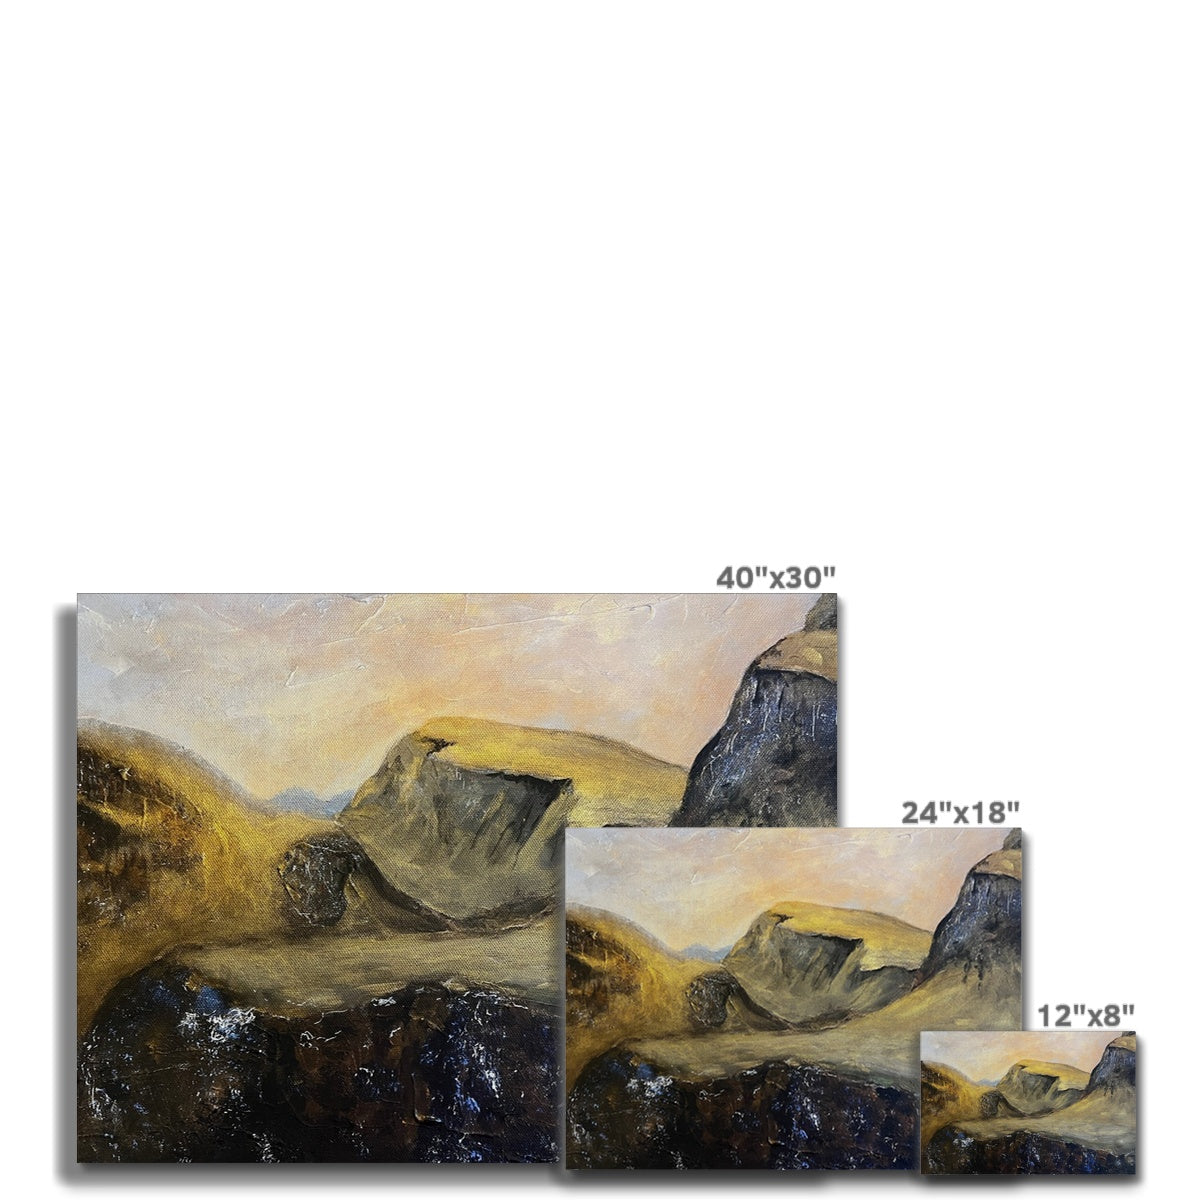 The Quiraing Skye Painting | Canvas From Scotland-Contemporary Stretched Canvas Prints-Skye Art Gallery-Paintings, Prints, Homeware, Art Gifts From Scotland By Scottish Artist Kevin Hunter